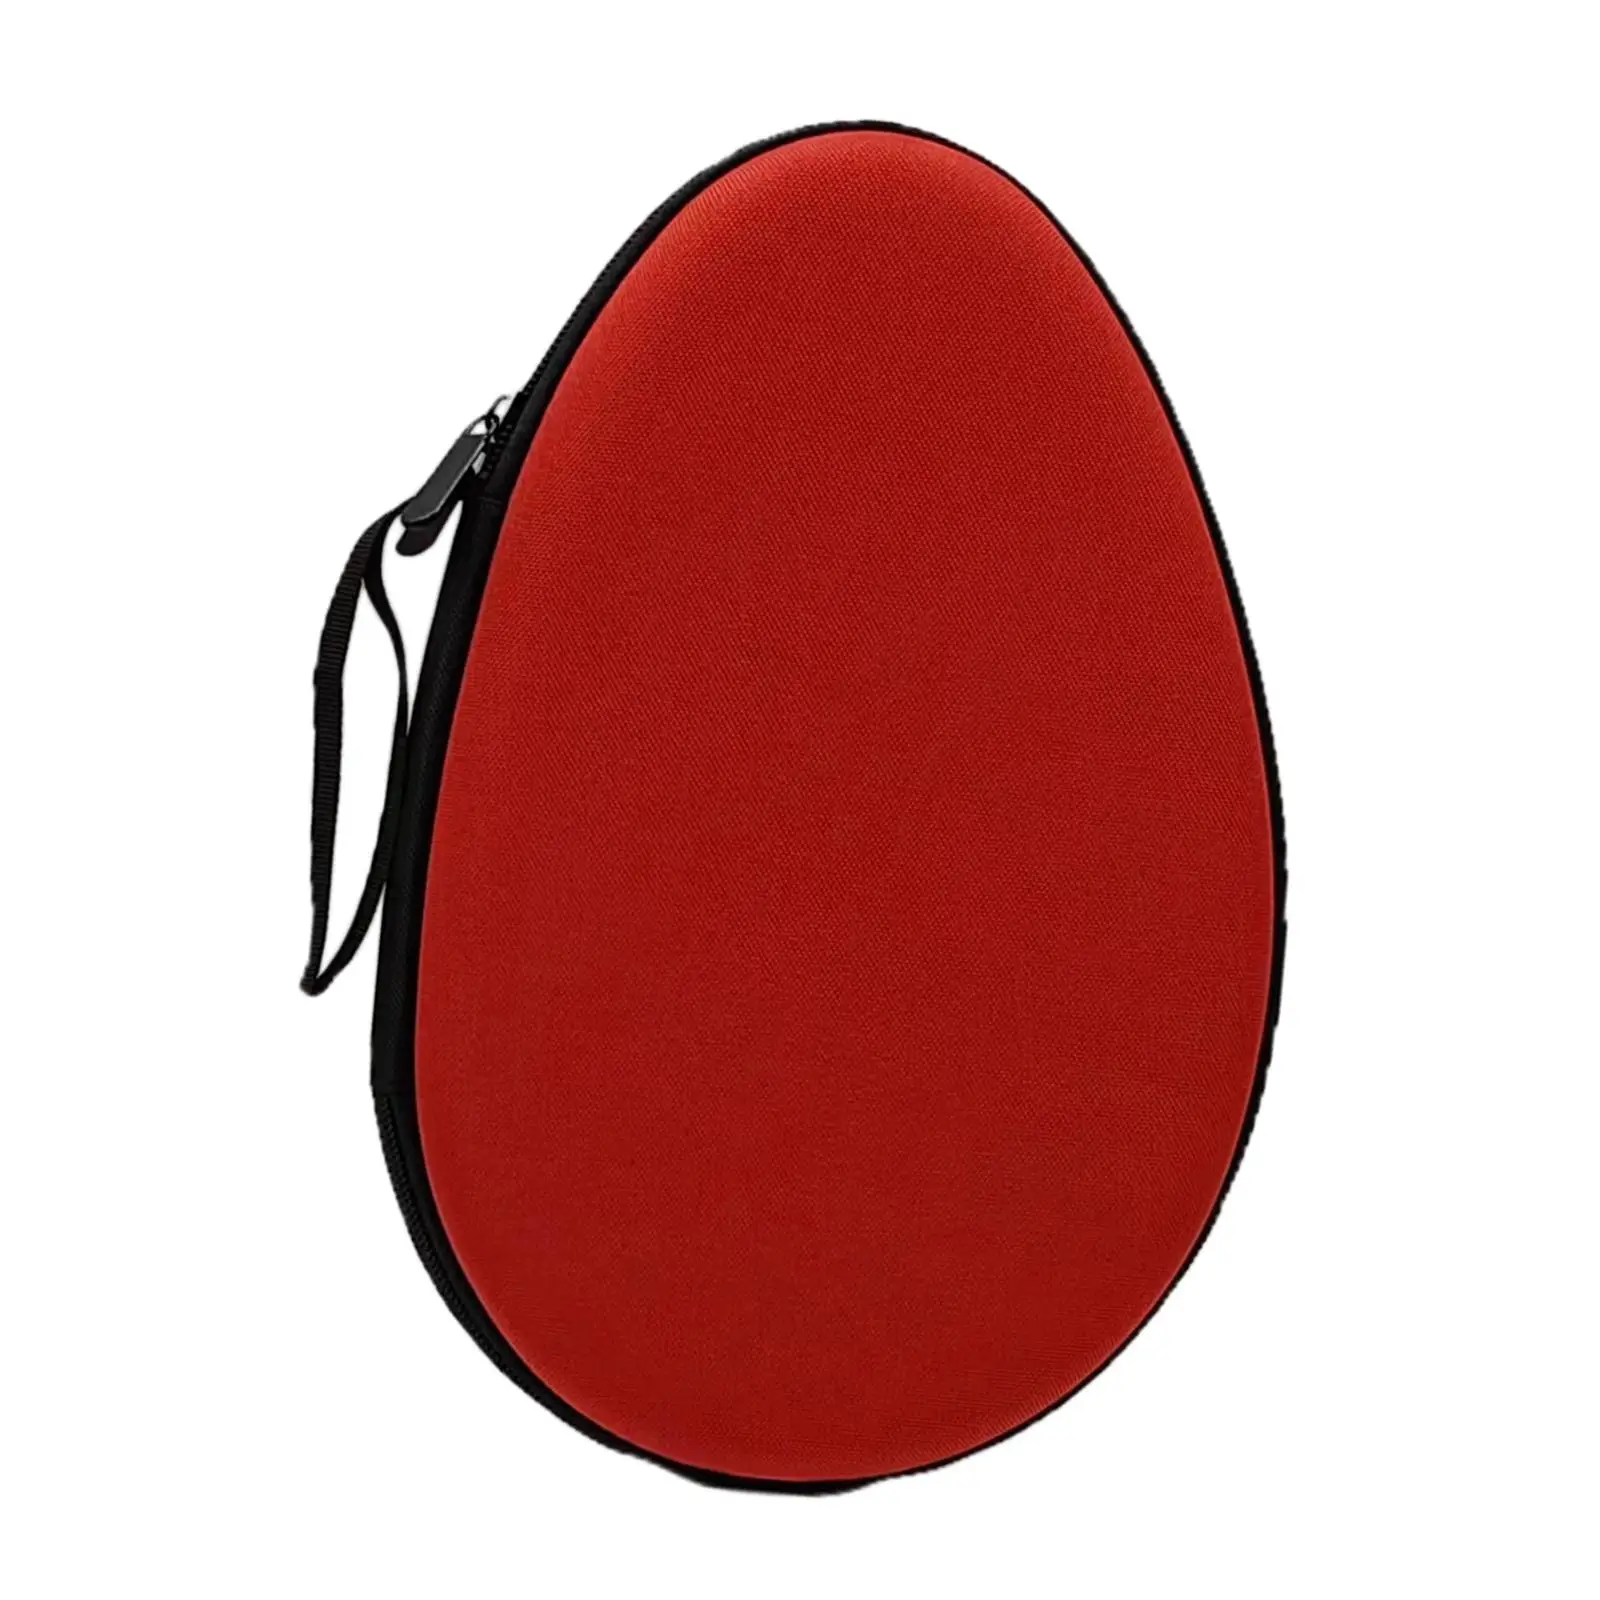 Multifunction Table Tennis Racket Bag with Zipper Ping Pong Paddle Bag for Travel